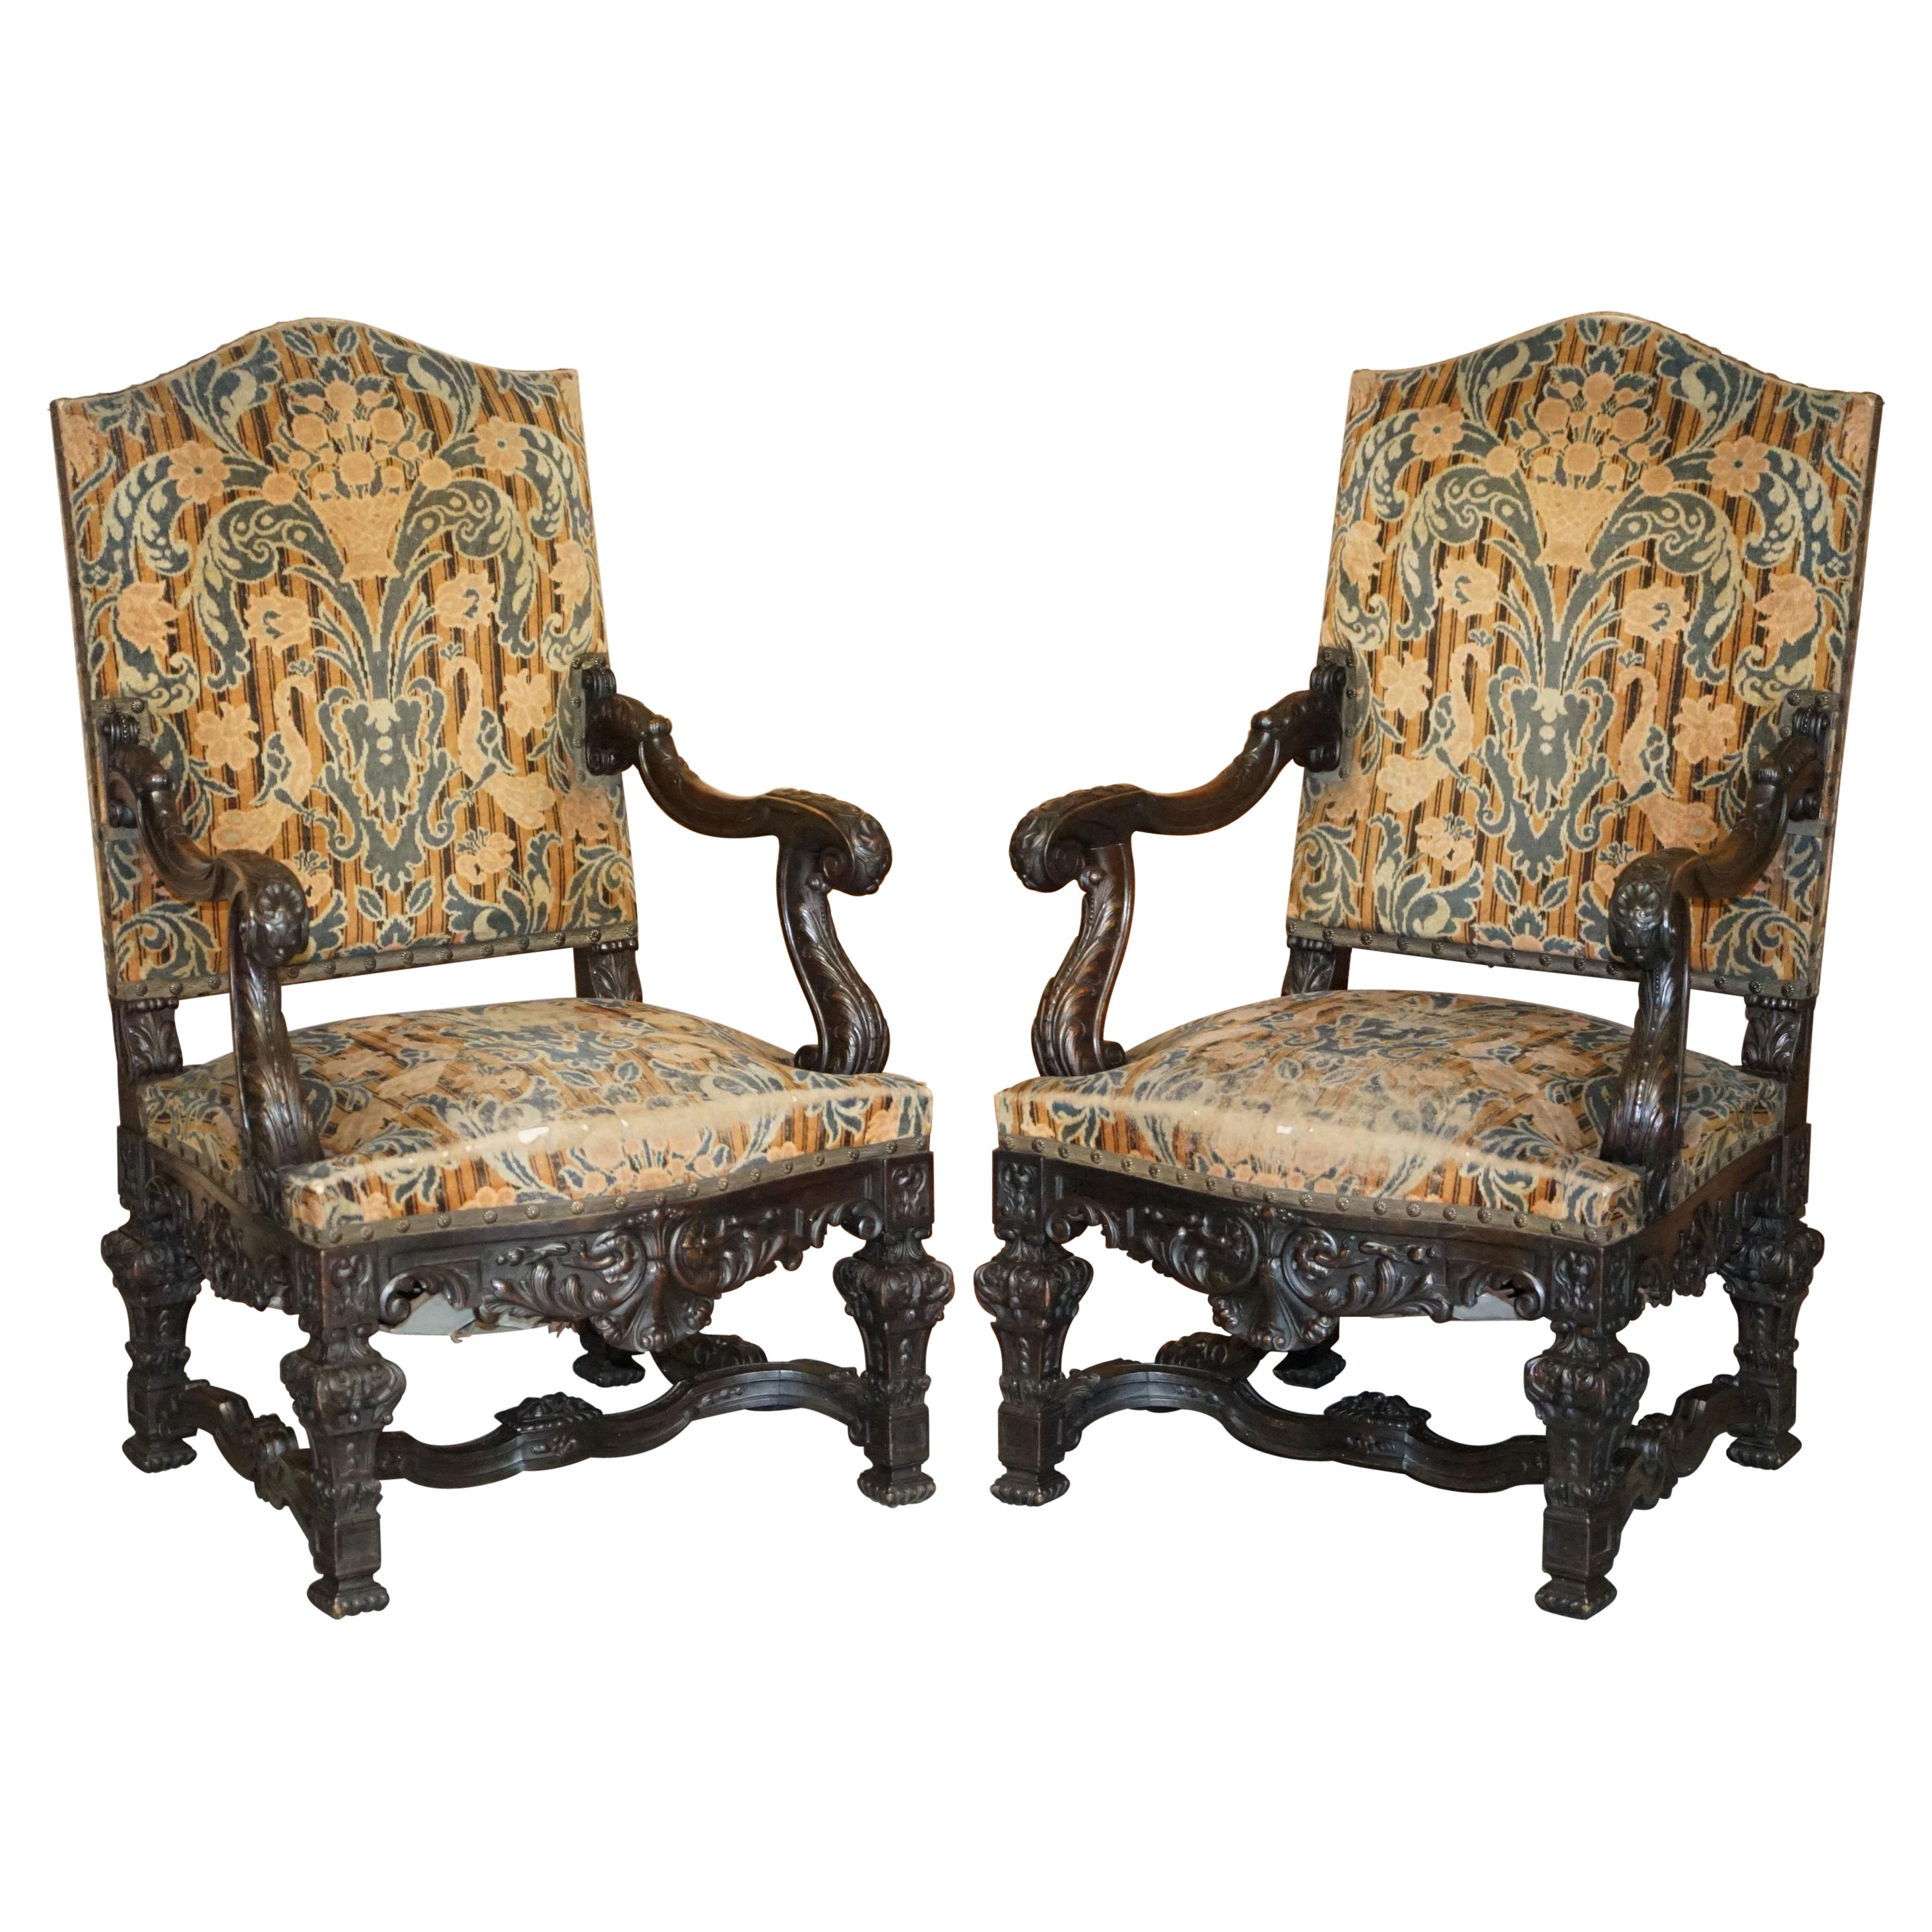 Stunning Pair of Hand Carved Italian Walnut Antique circa 1860 Throne Armchairs For Sale